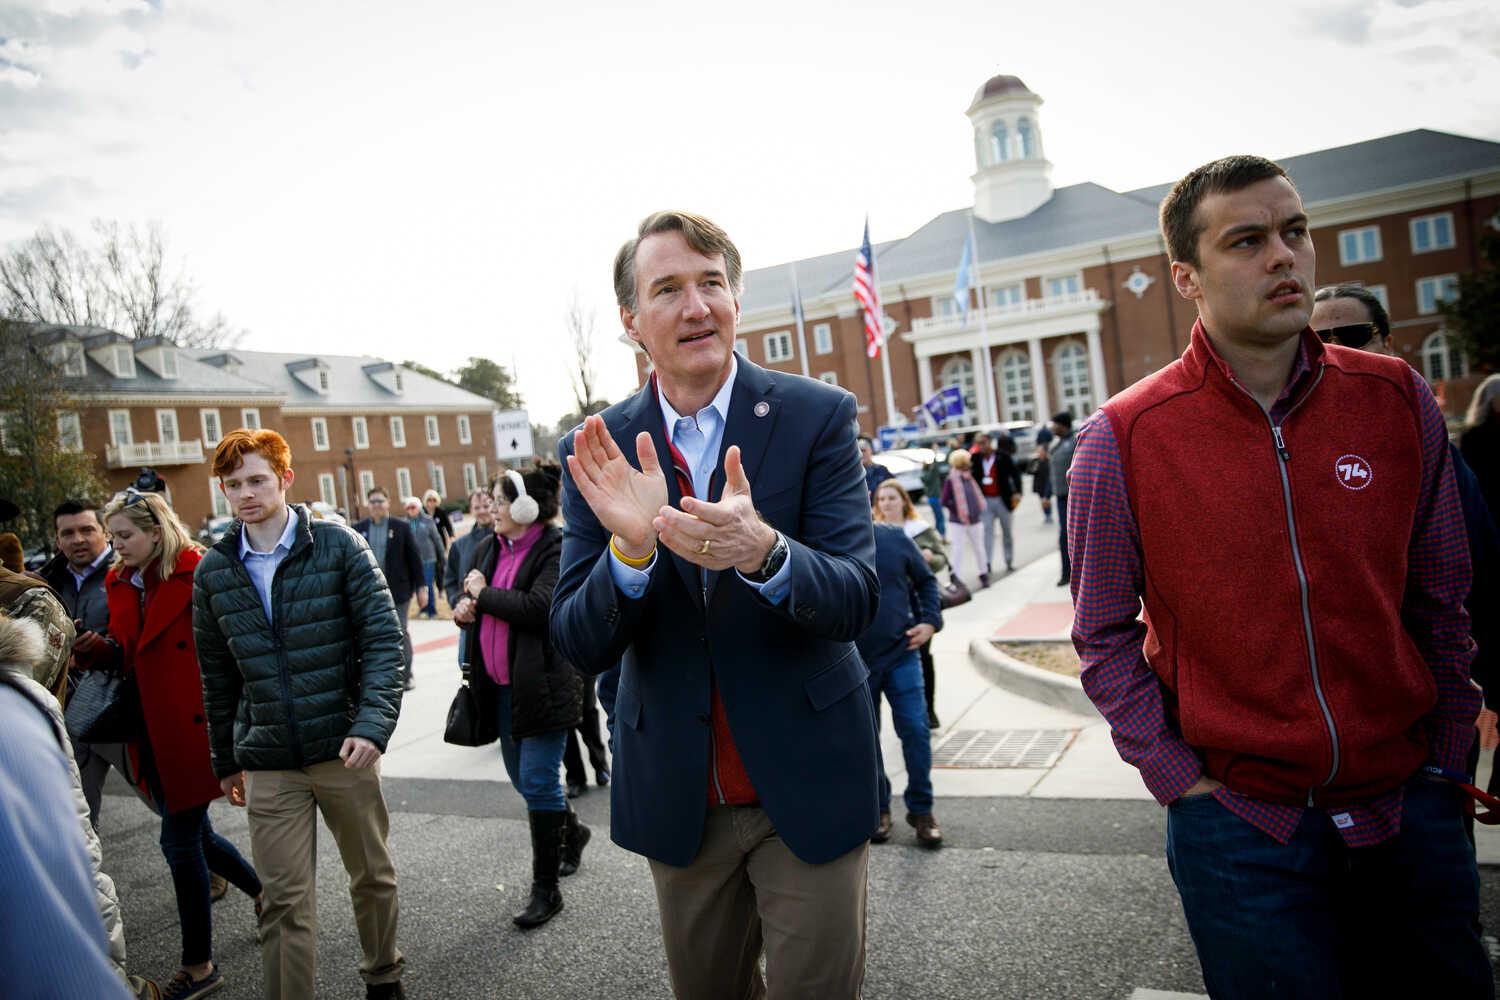 Governor Glenn Youngkin of Virginia in a blue blazer applauds as he walks among supporters in the plaza in front of the Virginia Beach City Hall.